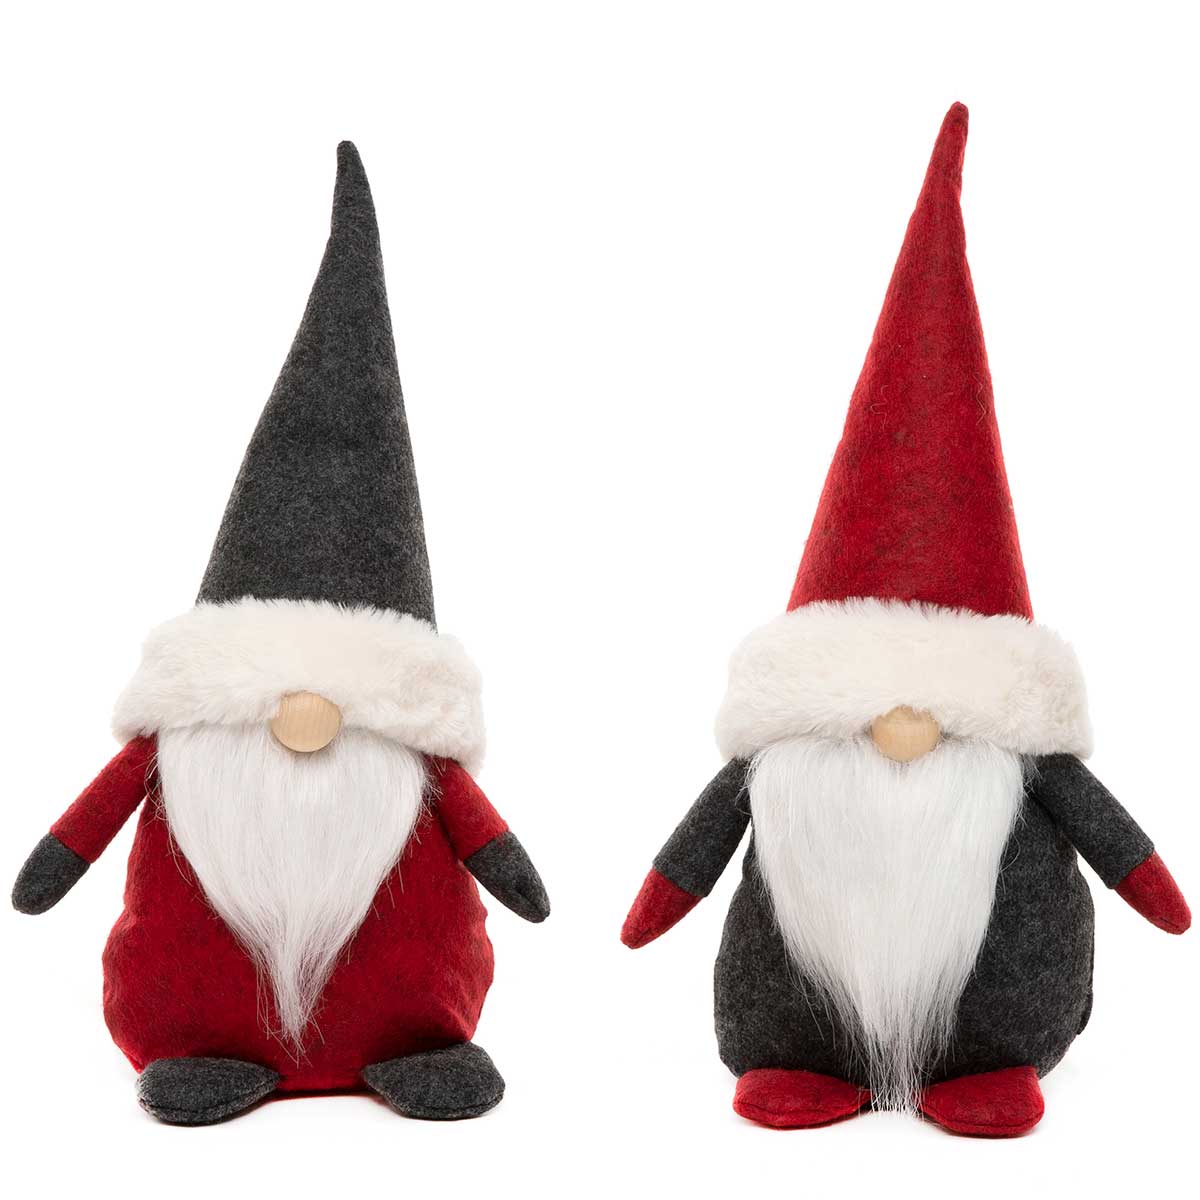 GNOME BROTHER 2 ASSORTED LG